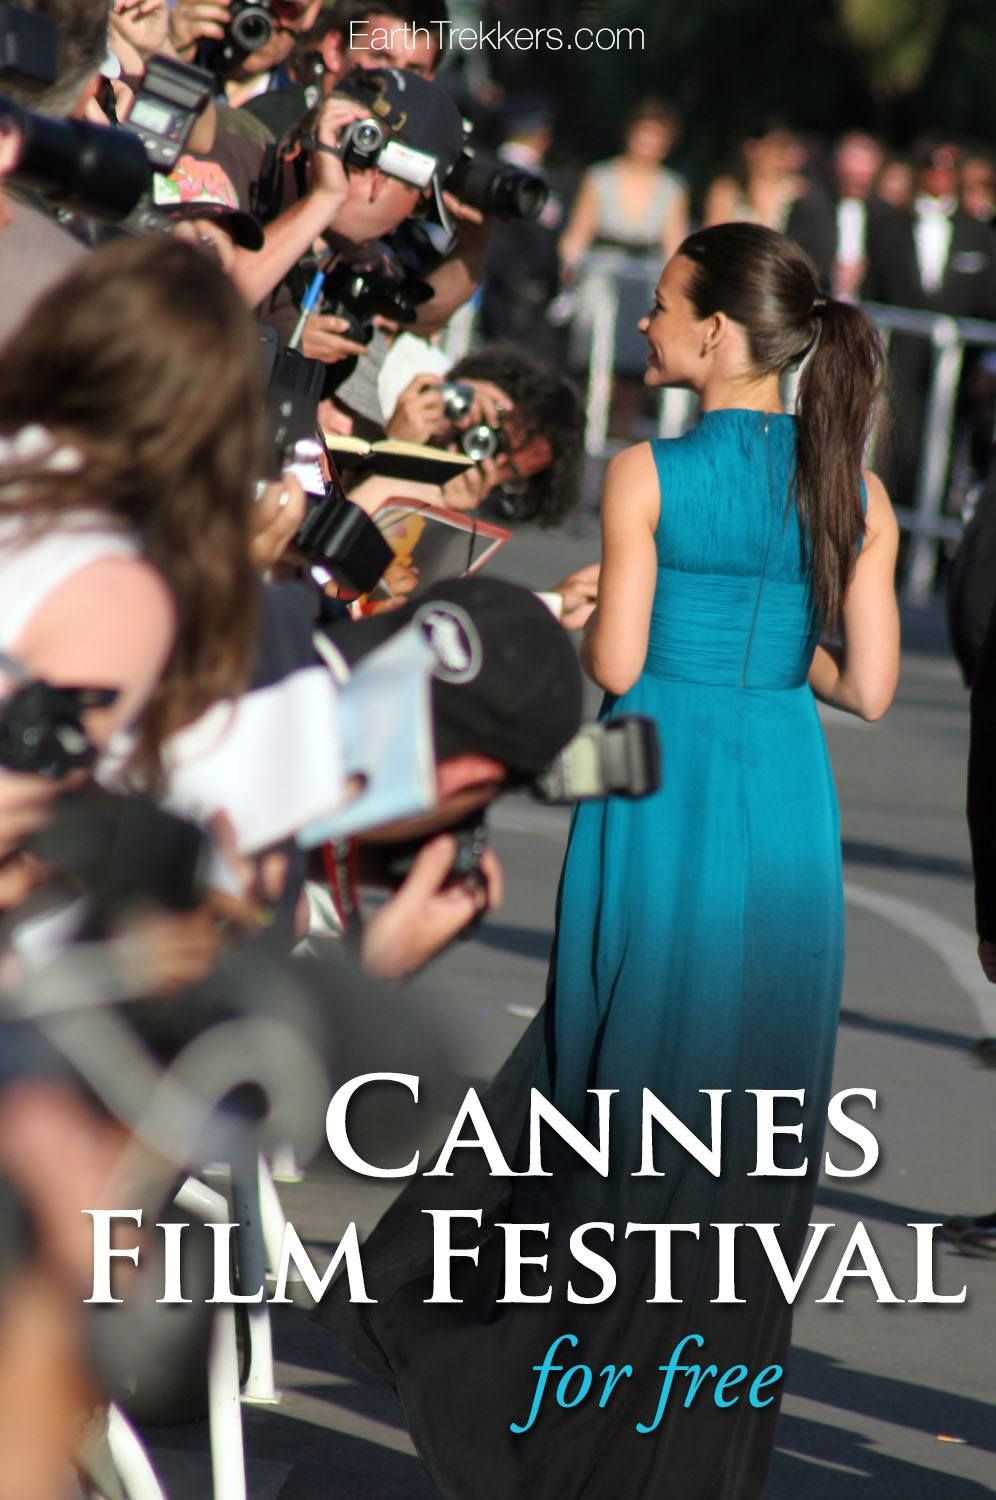 Cannes Film Festival for free